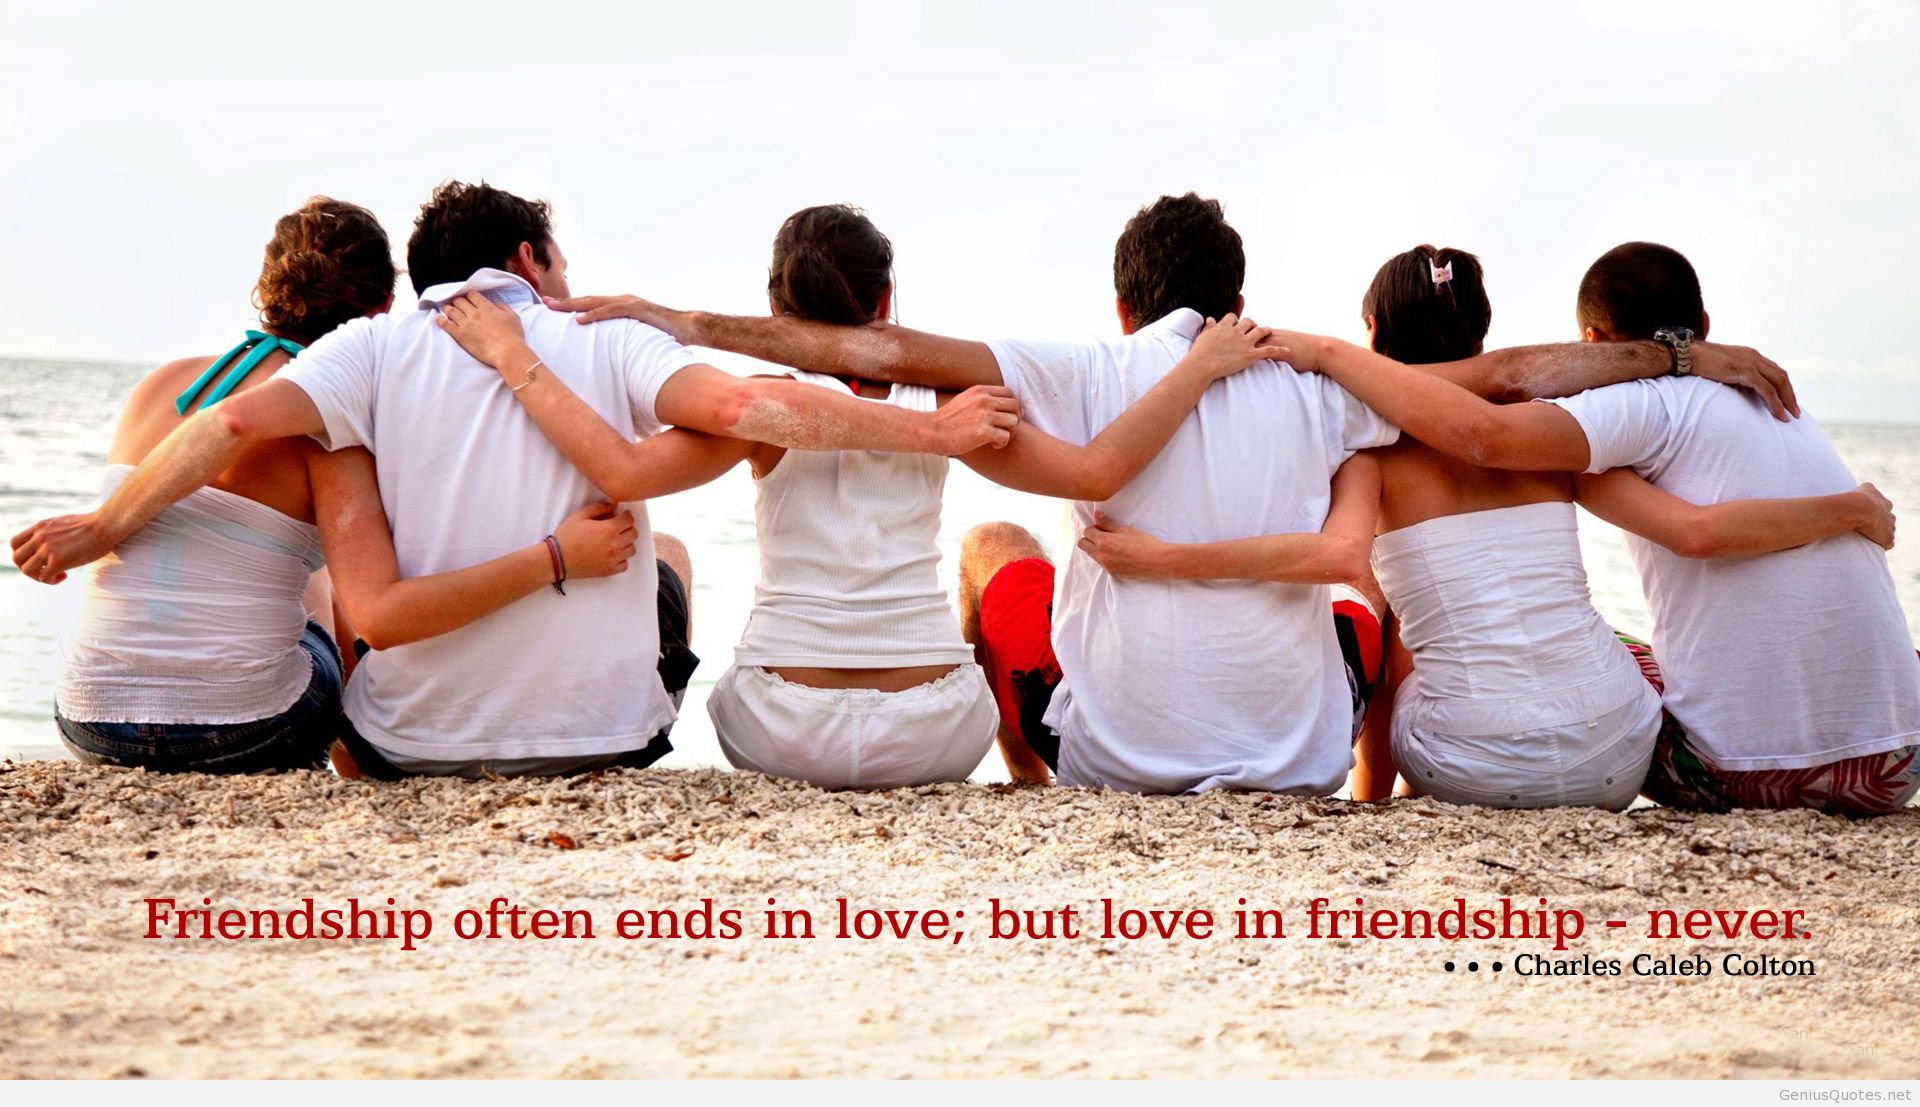 Free Download Incredible Friends - Best Friends Forever Images Facebook - HD Wallpaper 